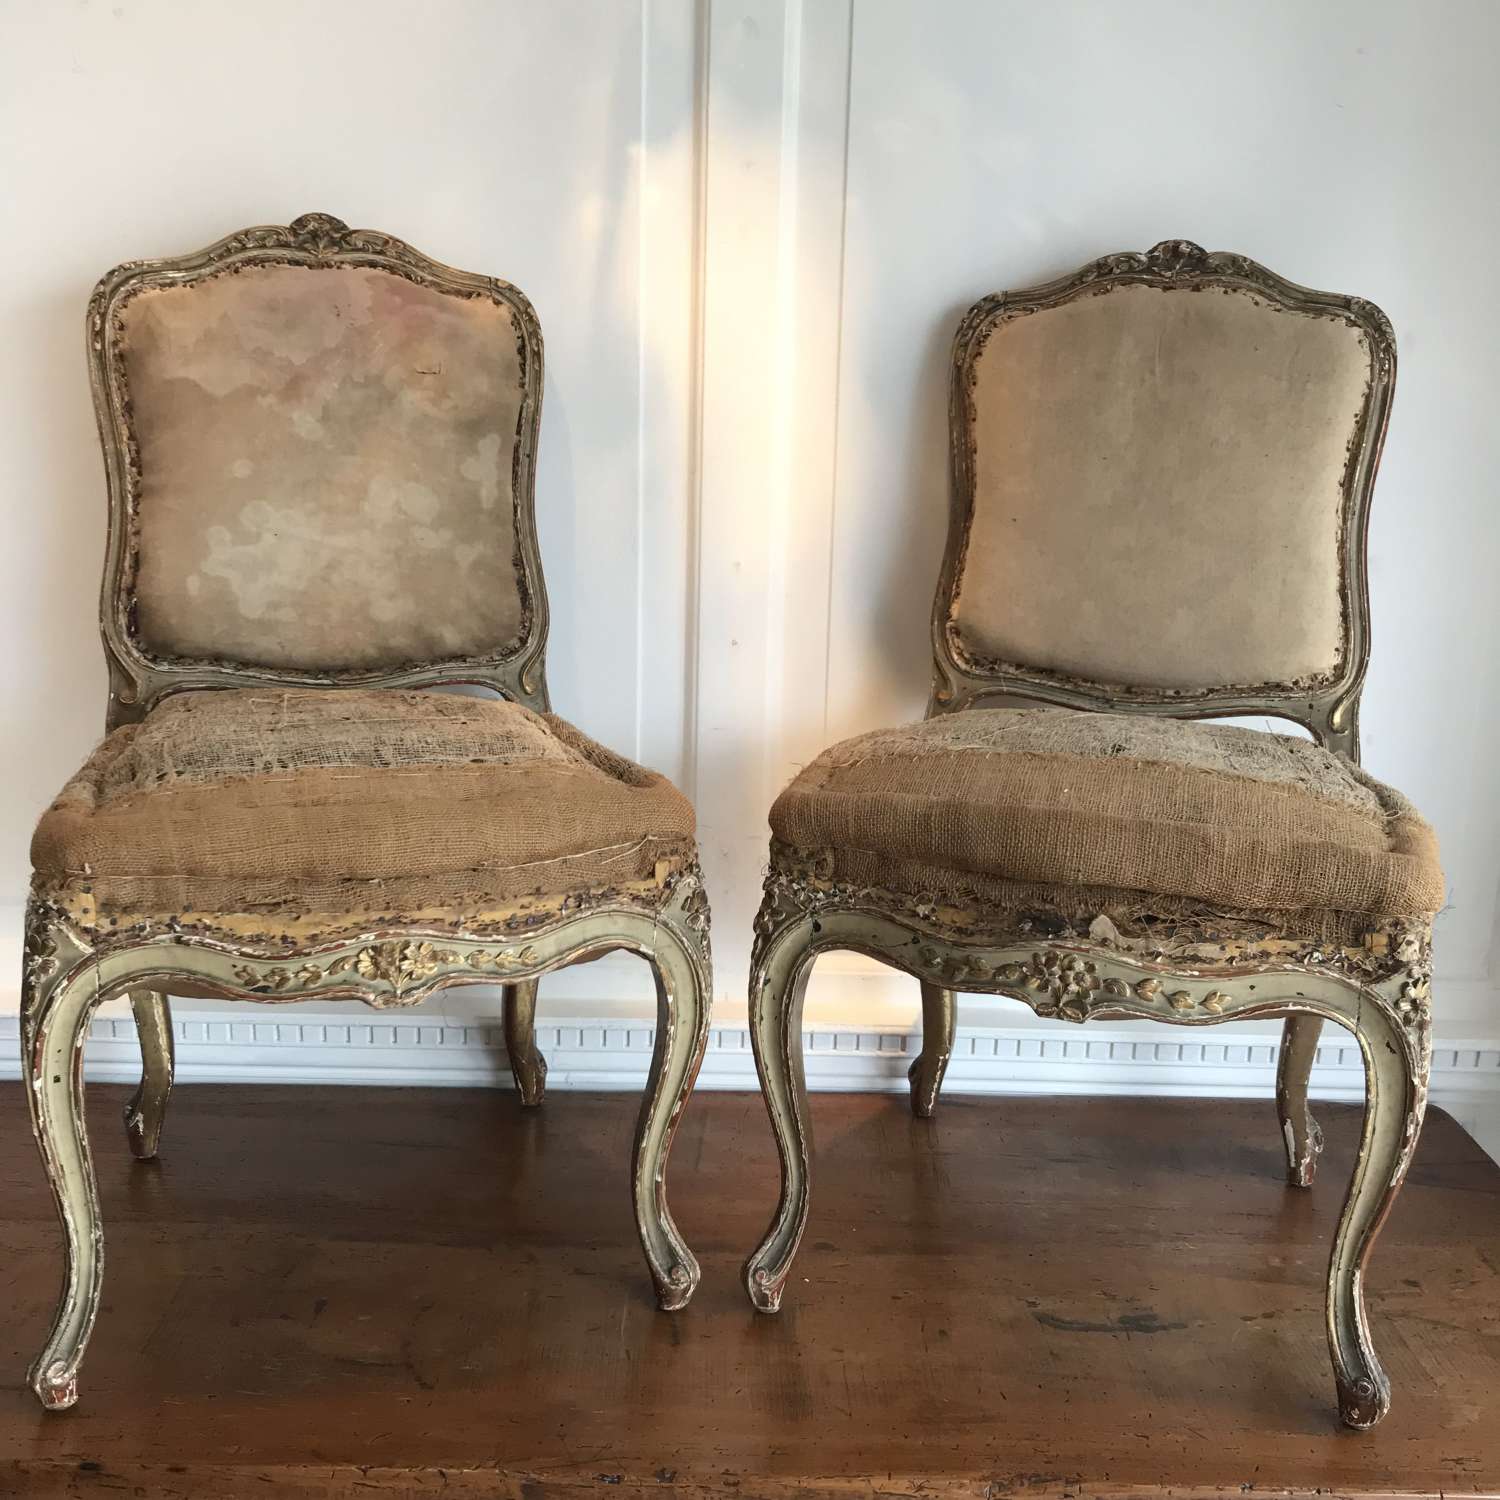 A pair of 18th century painted & gilded French chairs